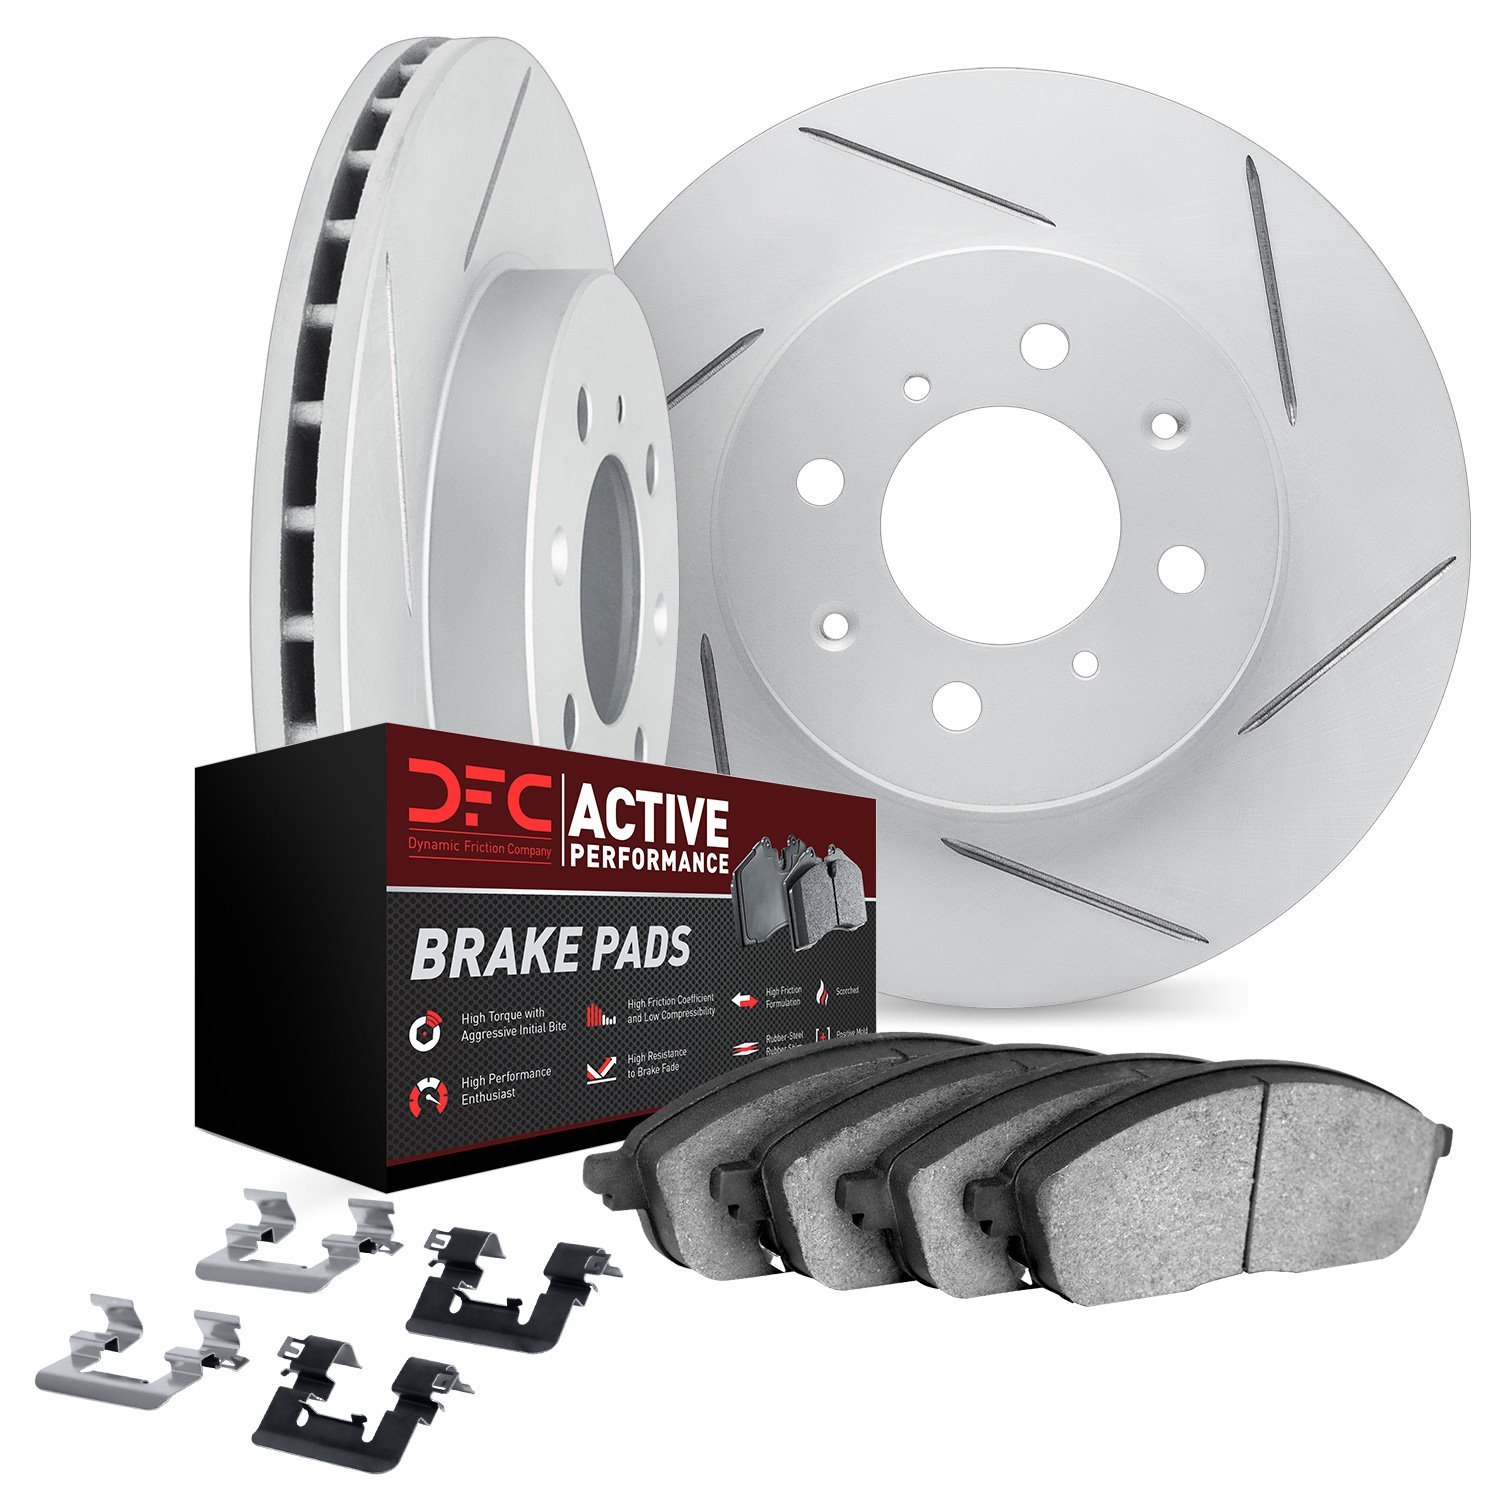 2712-74006 Geoperformance Slotted Brake Rotors with Active Performance Pads Kits & Hardware, 1986-2002 Audi/Volkswagen, Position